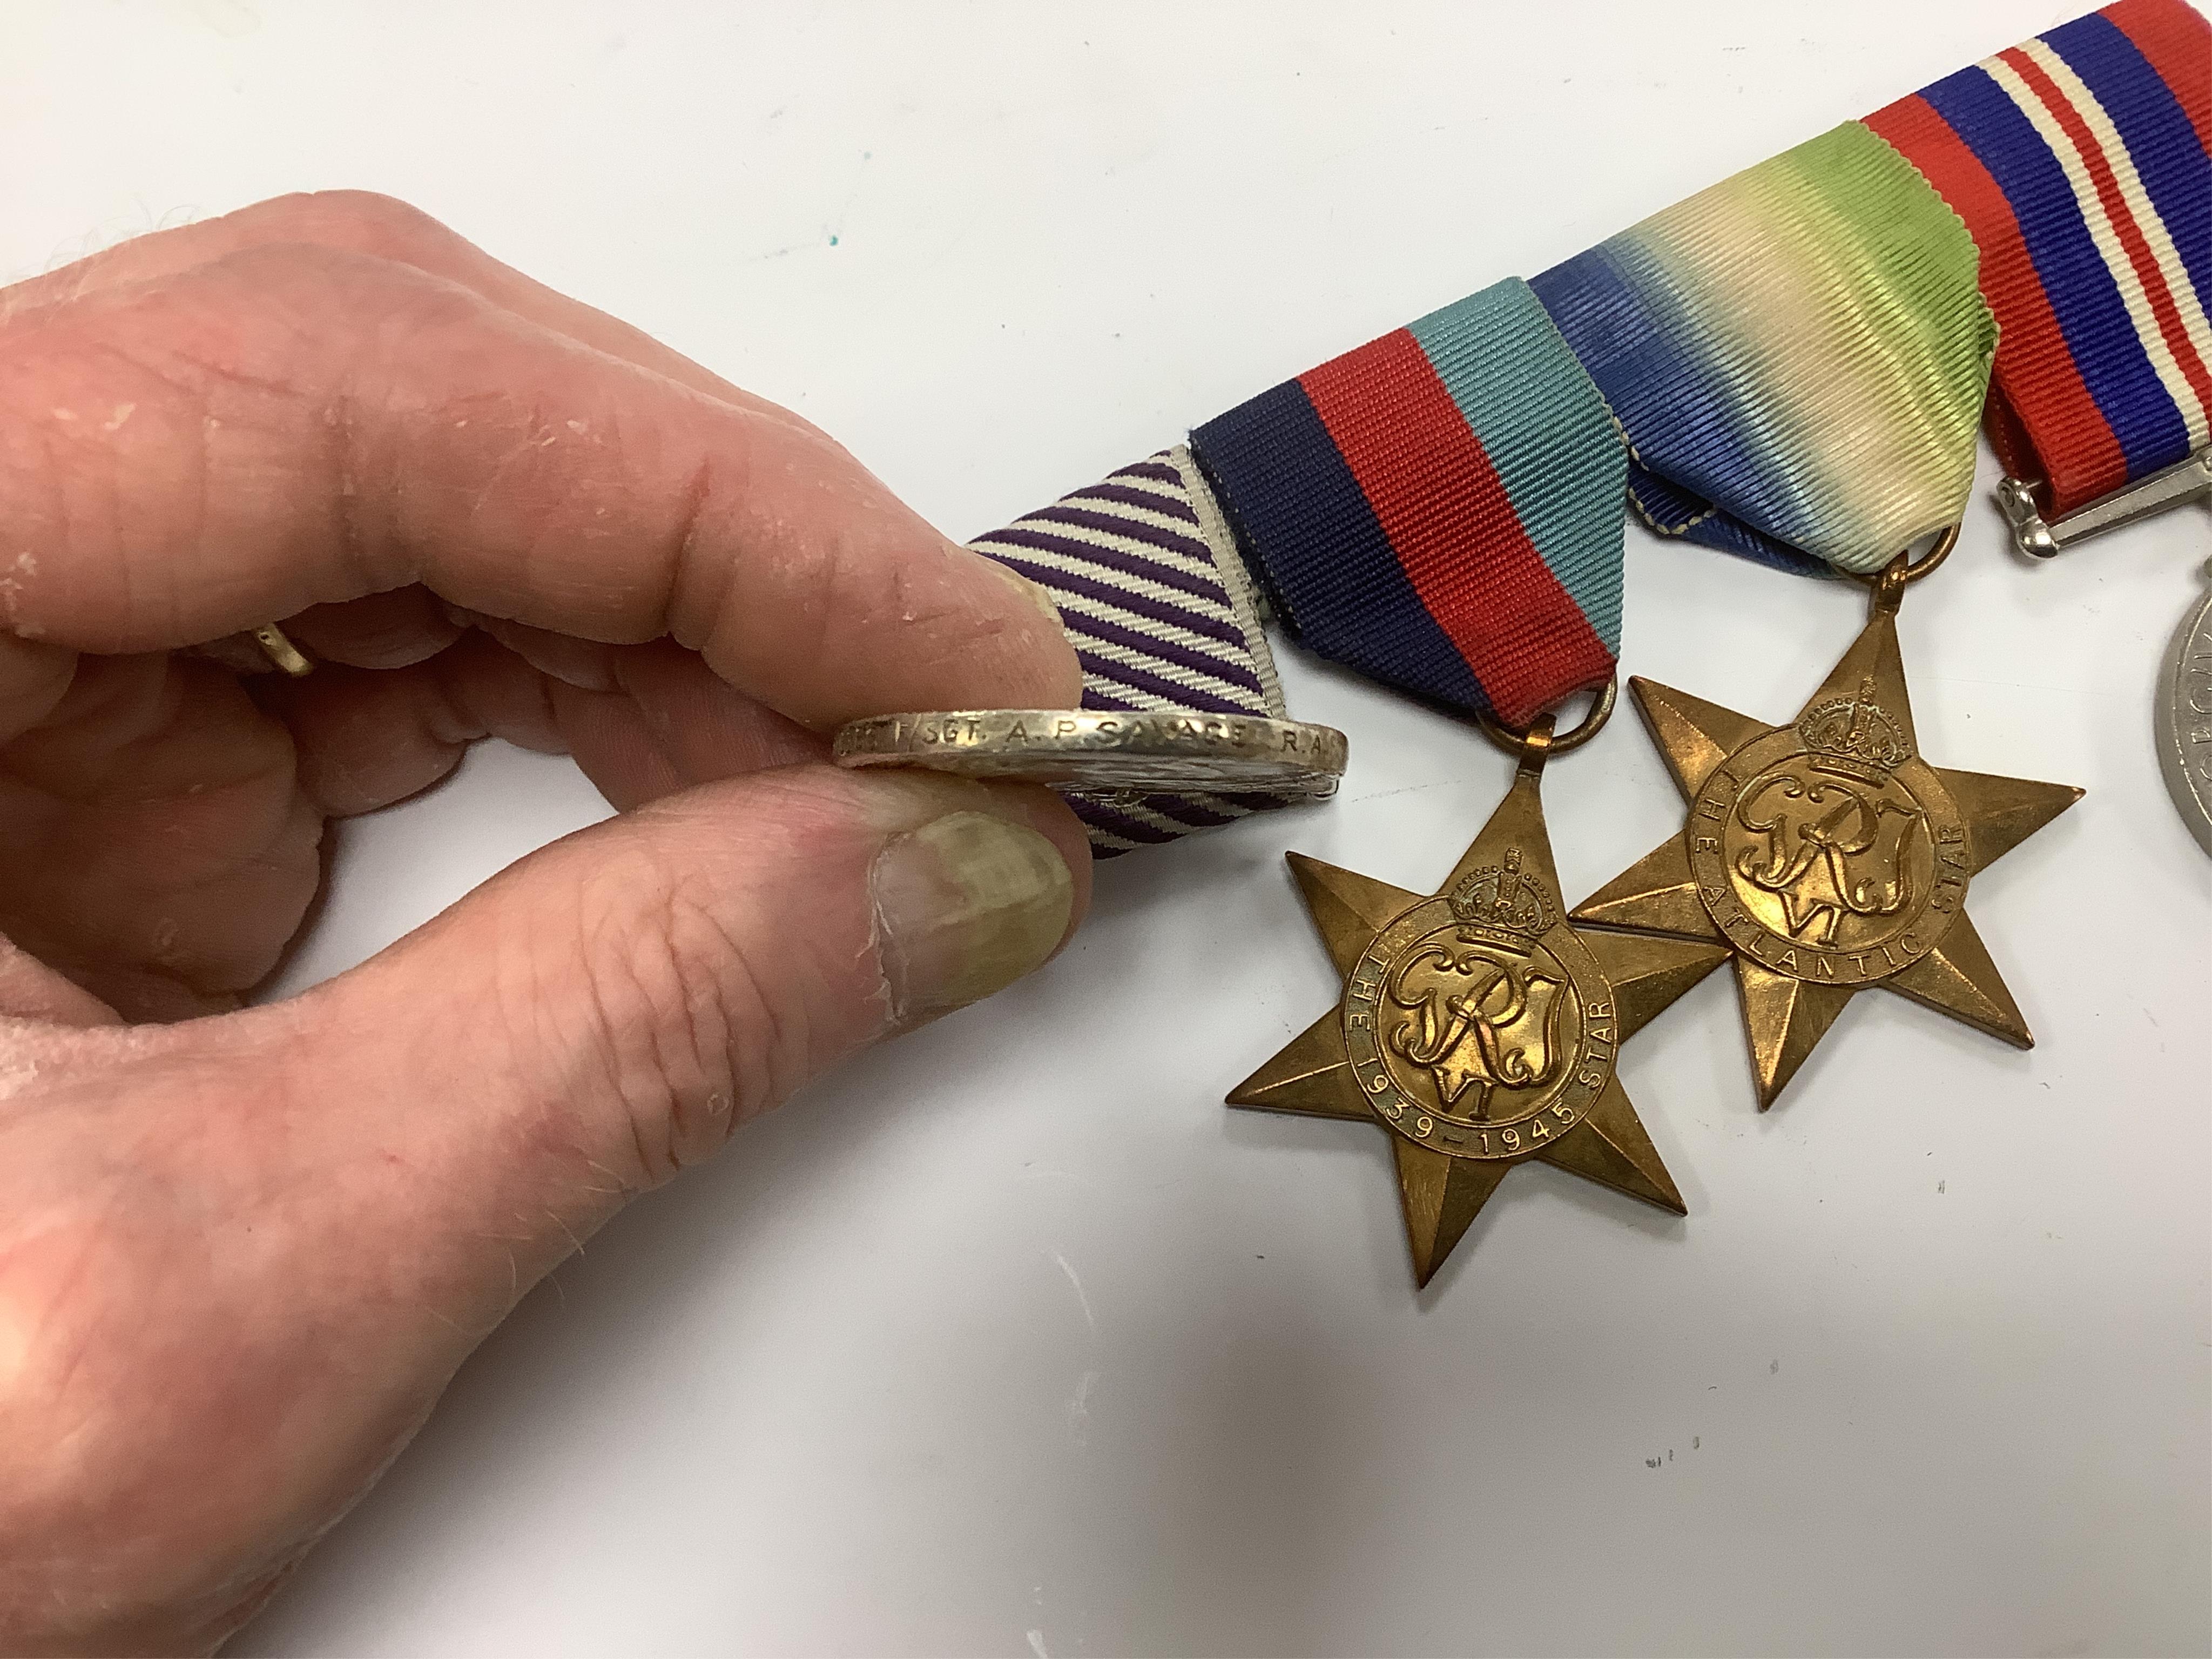 A Distinguished Flying Medal group awarded to Flight Sergeant A. Savage, comprising of the Distinguished Flying Medal together with the Atlantic Star, the 1939-1945 Star and the War Medal